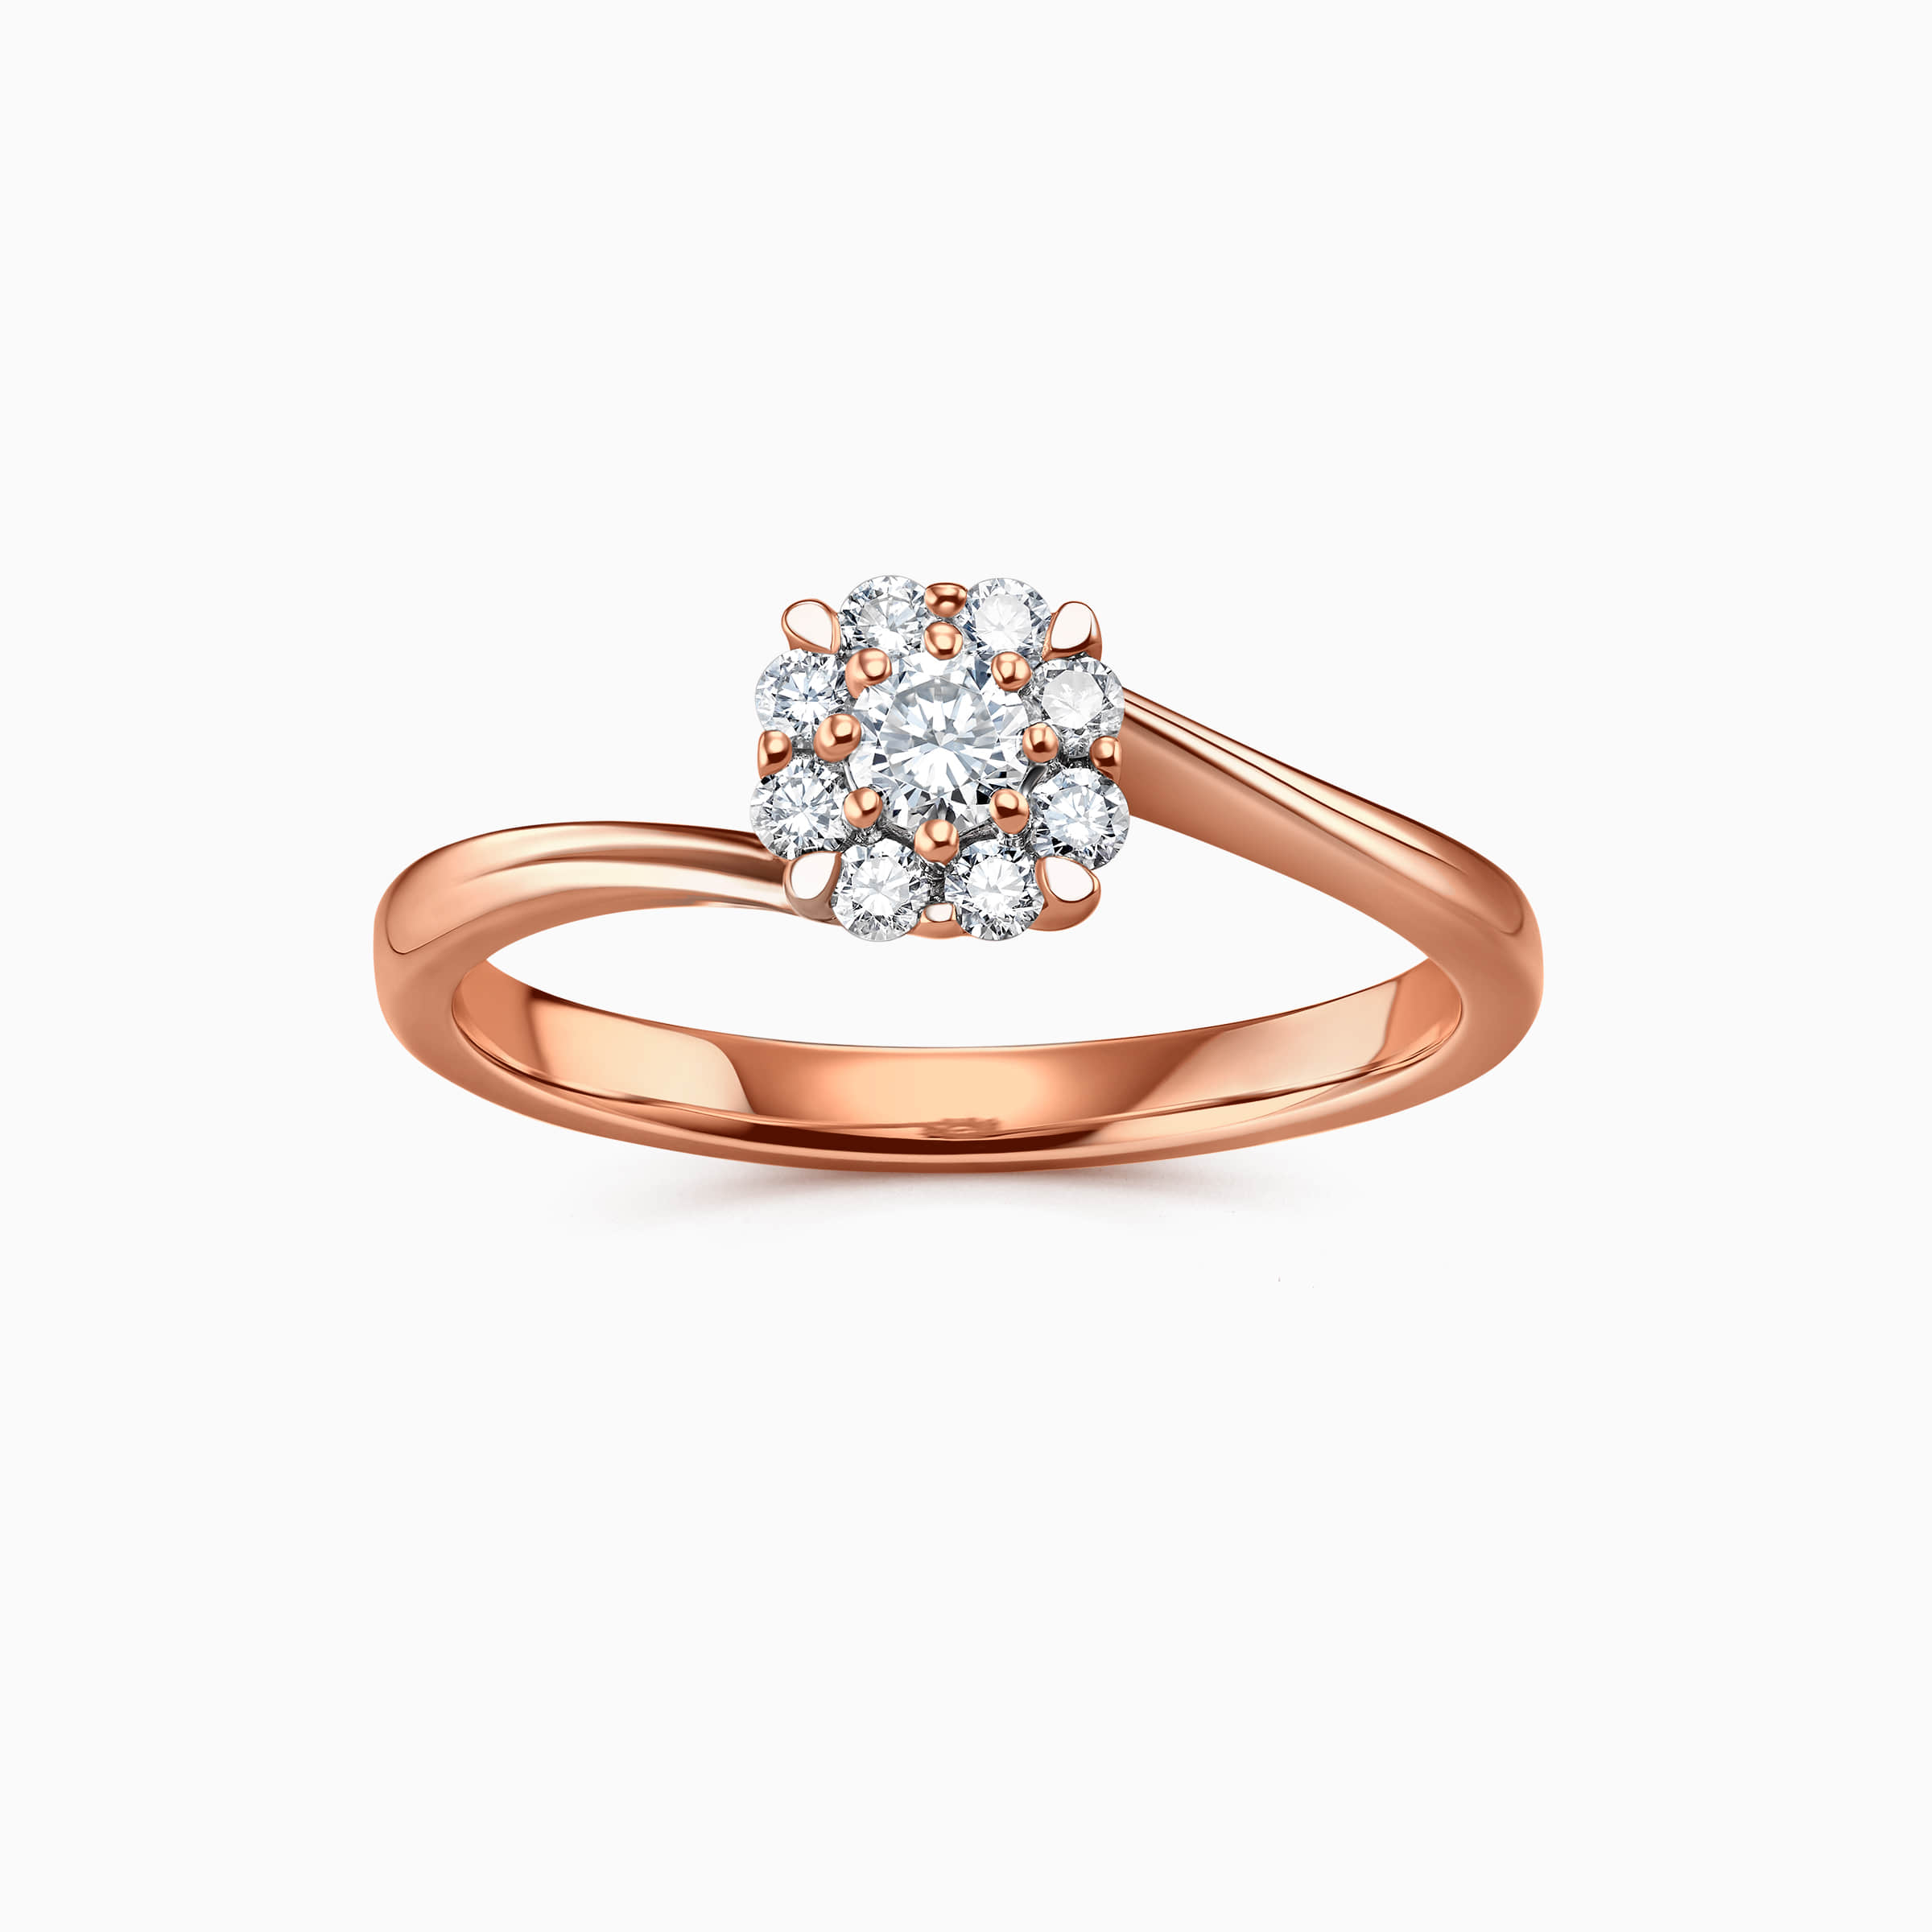 Darry Ring unique halo promise ring rose gold